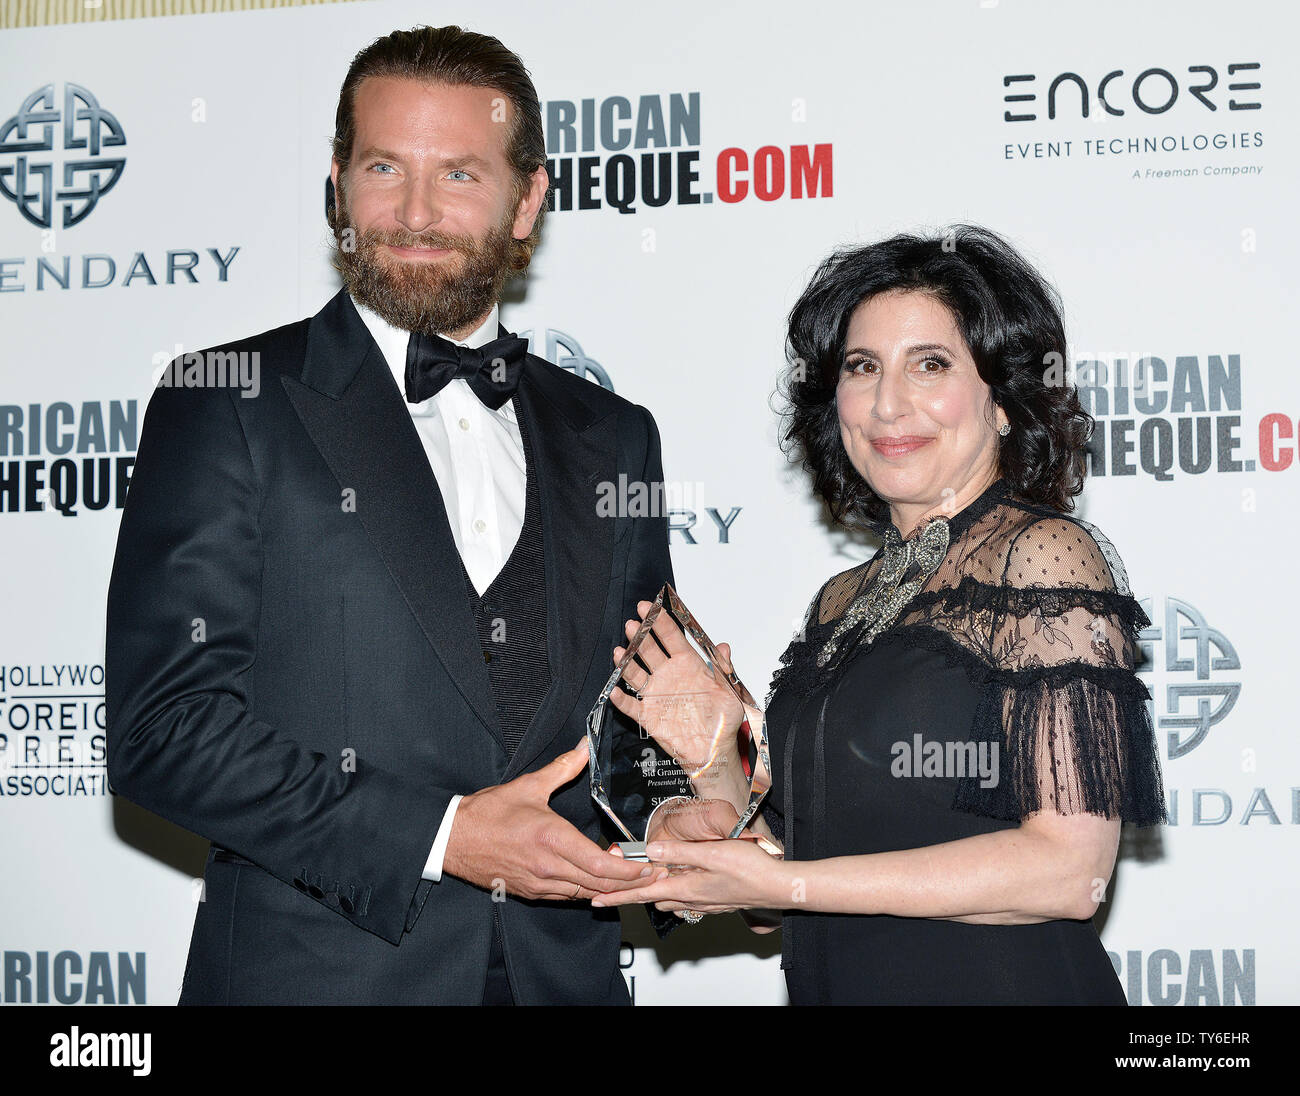 Bradley Cooper (L) presents Sue Kroll with the 2nd Annual Sid Grauman Award at the American Cinematheque's annual award show at the Beverly Hilton in Beverly Hills, California on October 14, 2016. The event is a fundraiser to benefit the community film programs of the American Cinematheque, a non-profit viewer-supported arts organization that preserves the historic Egyptian Theatre on Hollywood Boulevard and the Aero Theatre in Santa Monica. Photo by Christine Chew/UPI Stock Photo